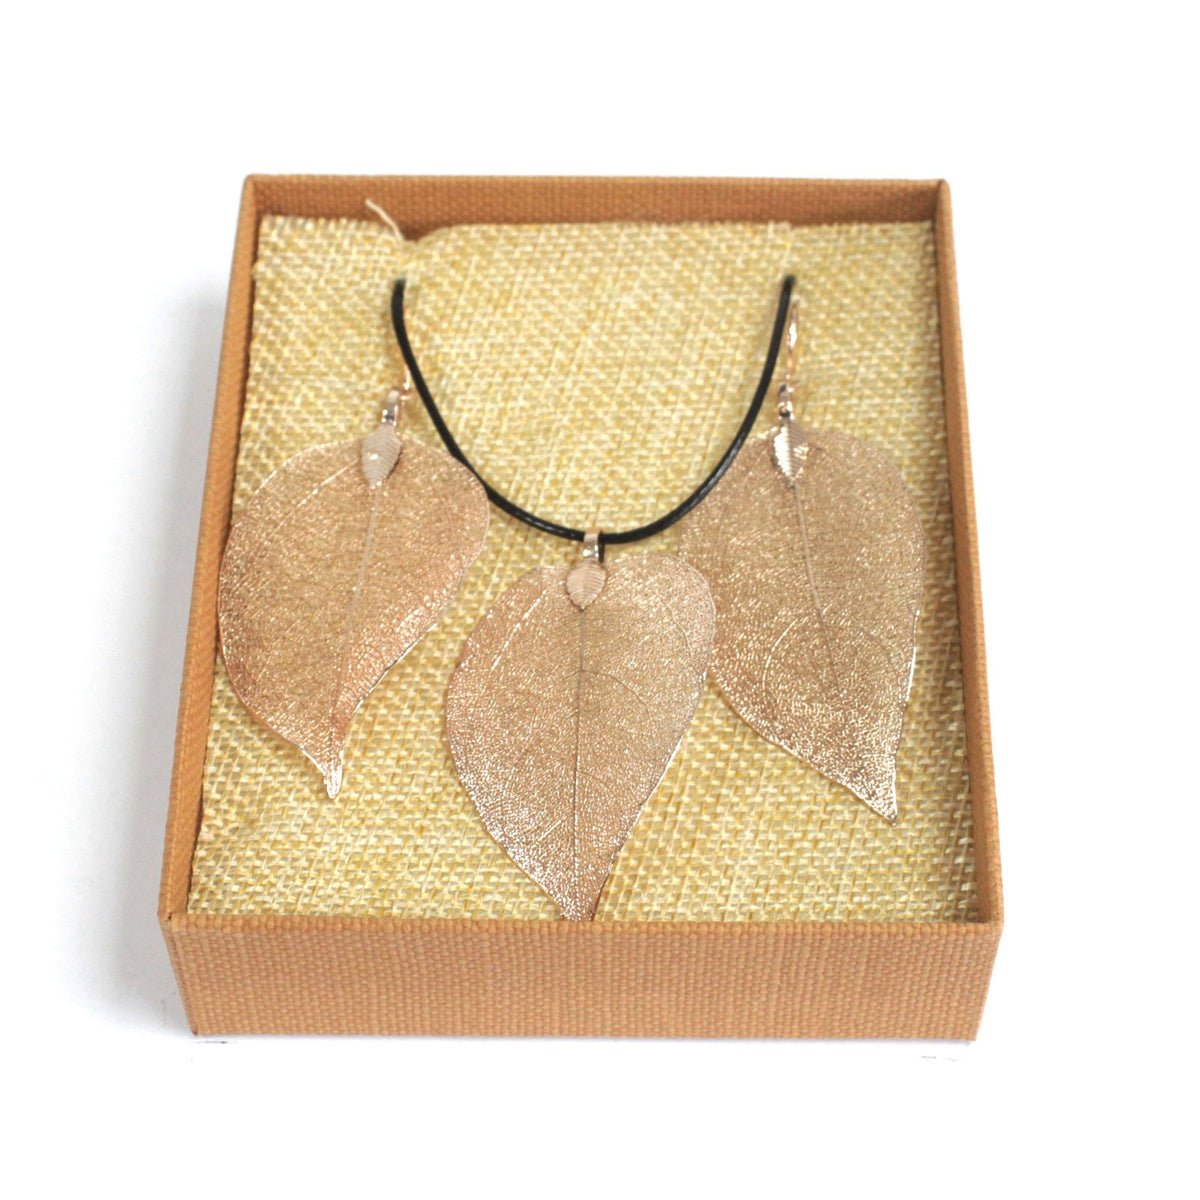 Necklace and Earing Set - Bravery Leaf